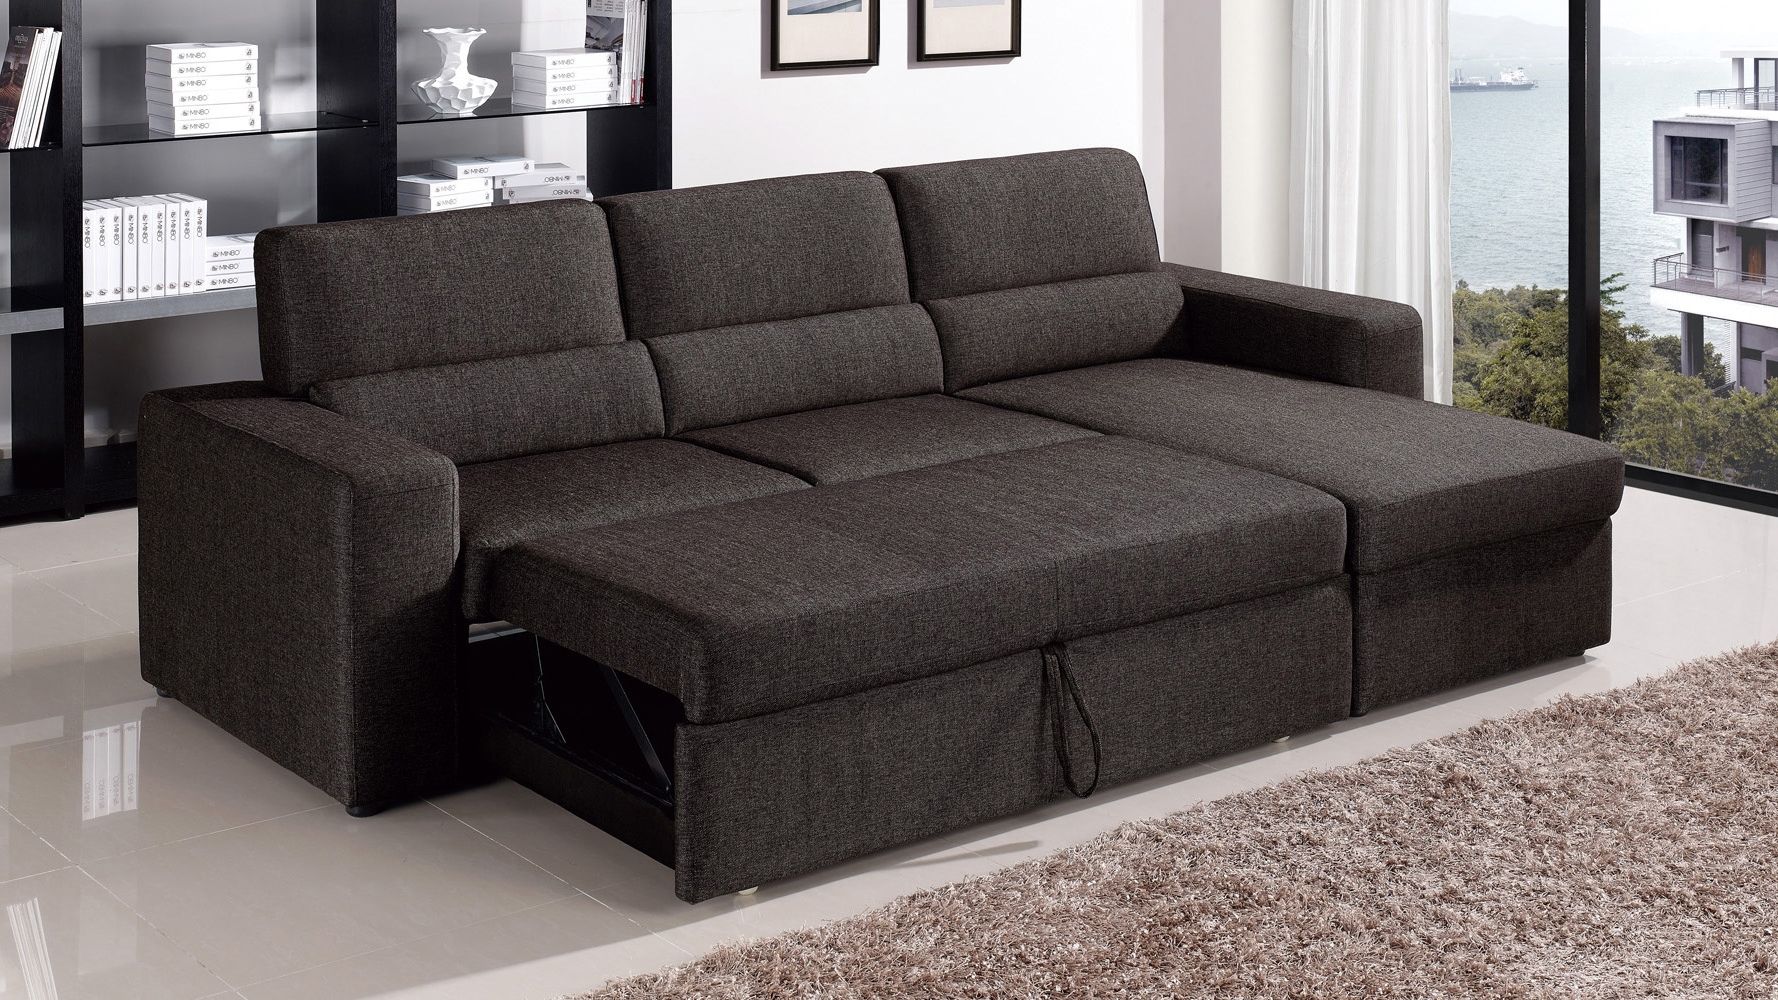 Chaise Sleepers Within Trendy Black/brown Clubber Sleeper Sectional Sofa (View 3 of 15)